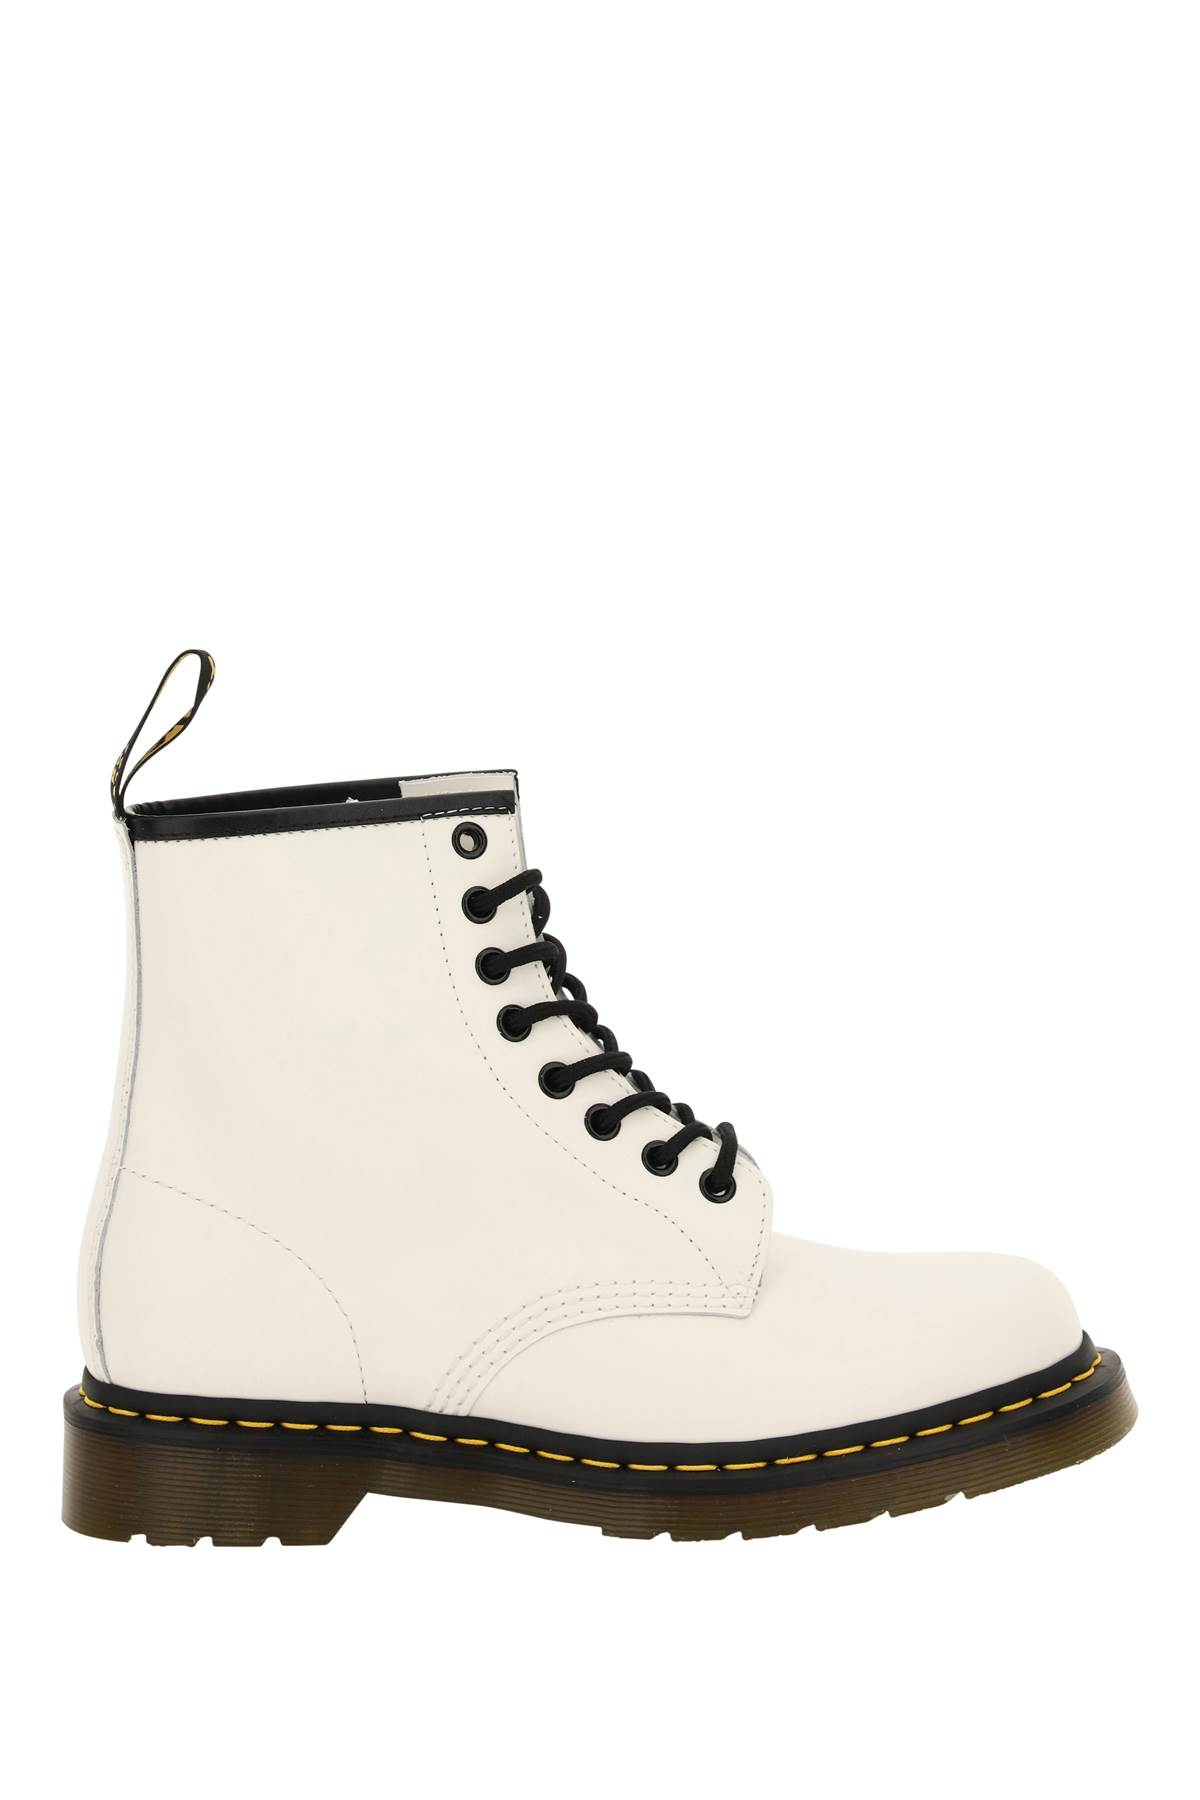 Dr. Martens 1460 Smooth Lace-up Combat Boots